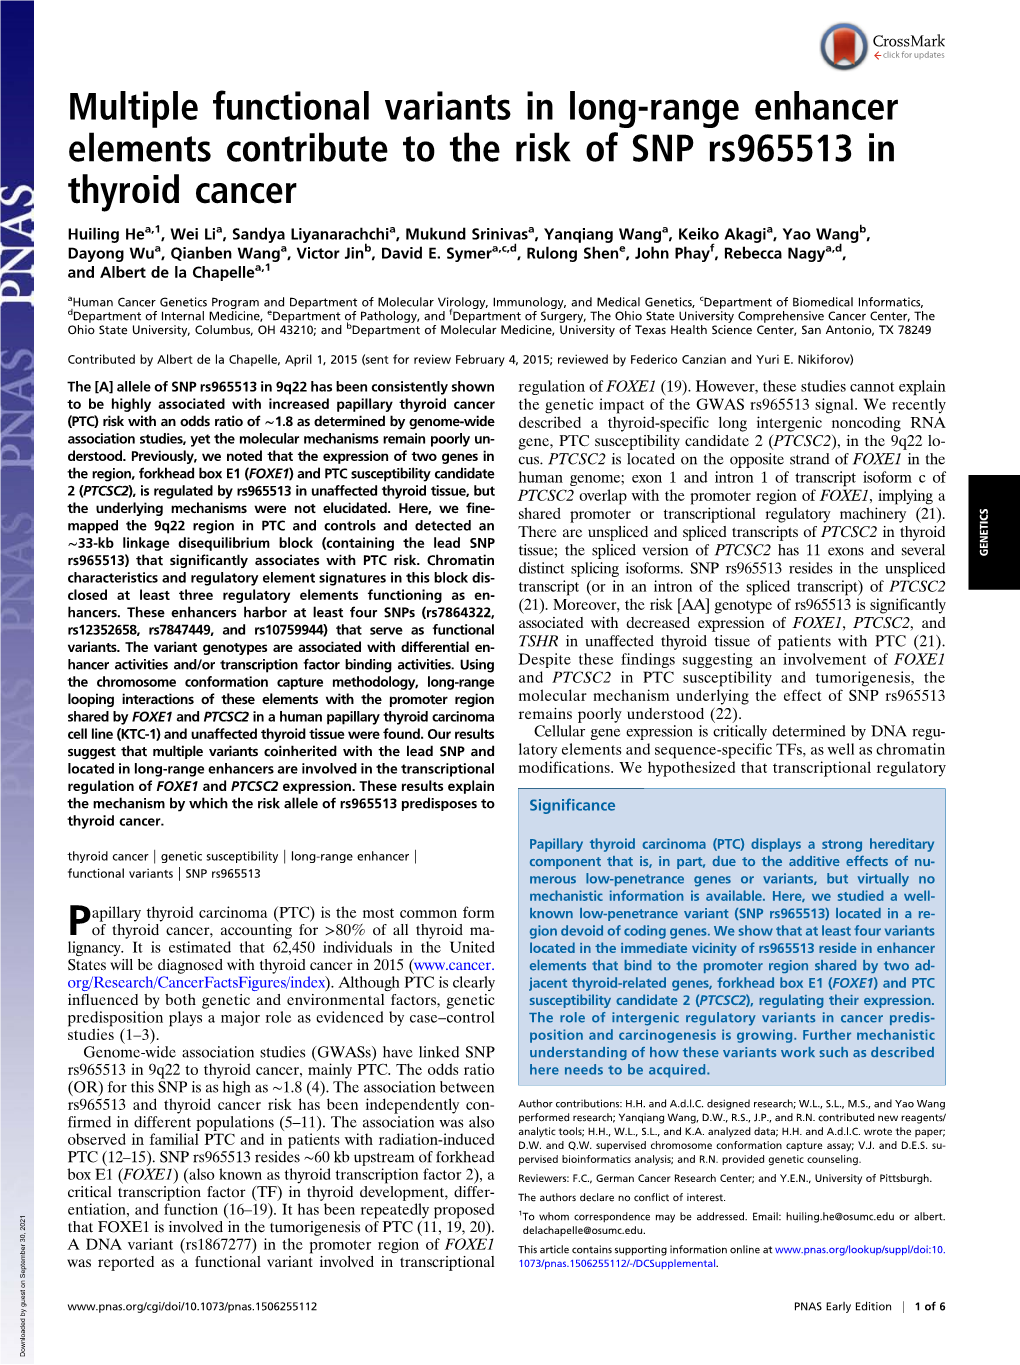 Multiple Functional Variants in Long-Range Enhancer Elements Contribute to the Risk of SNP Rs965513 in Thyroid Cancer